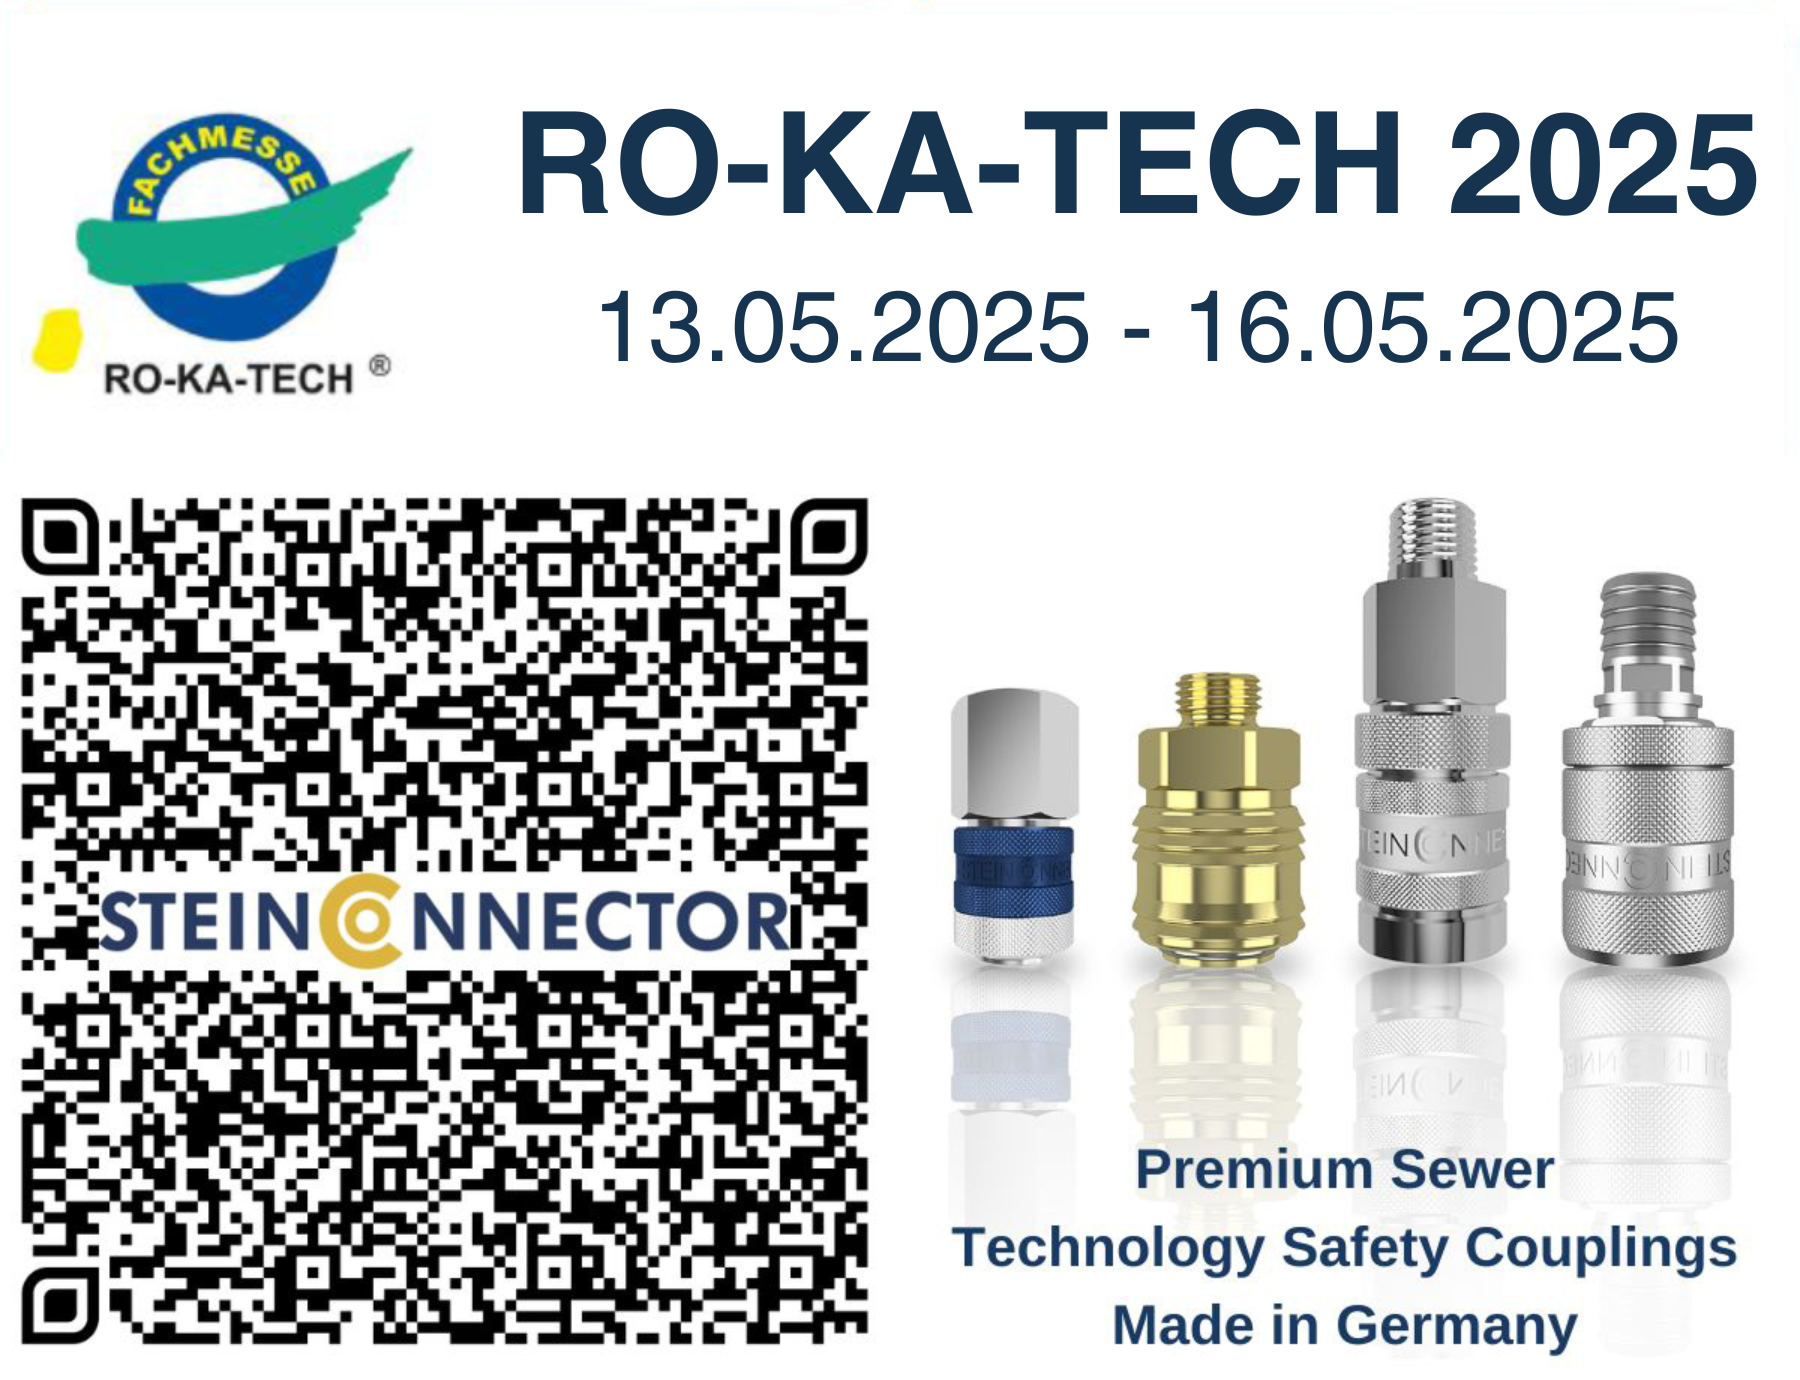 ro-ka-tech fair sewer technology wastewater technology compressed air accessories fittings compressed air connections for shut-off bladder sichherit coupling for push rod quick coupling safety lock clean break coupling flat face premium made in germany positive locking